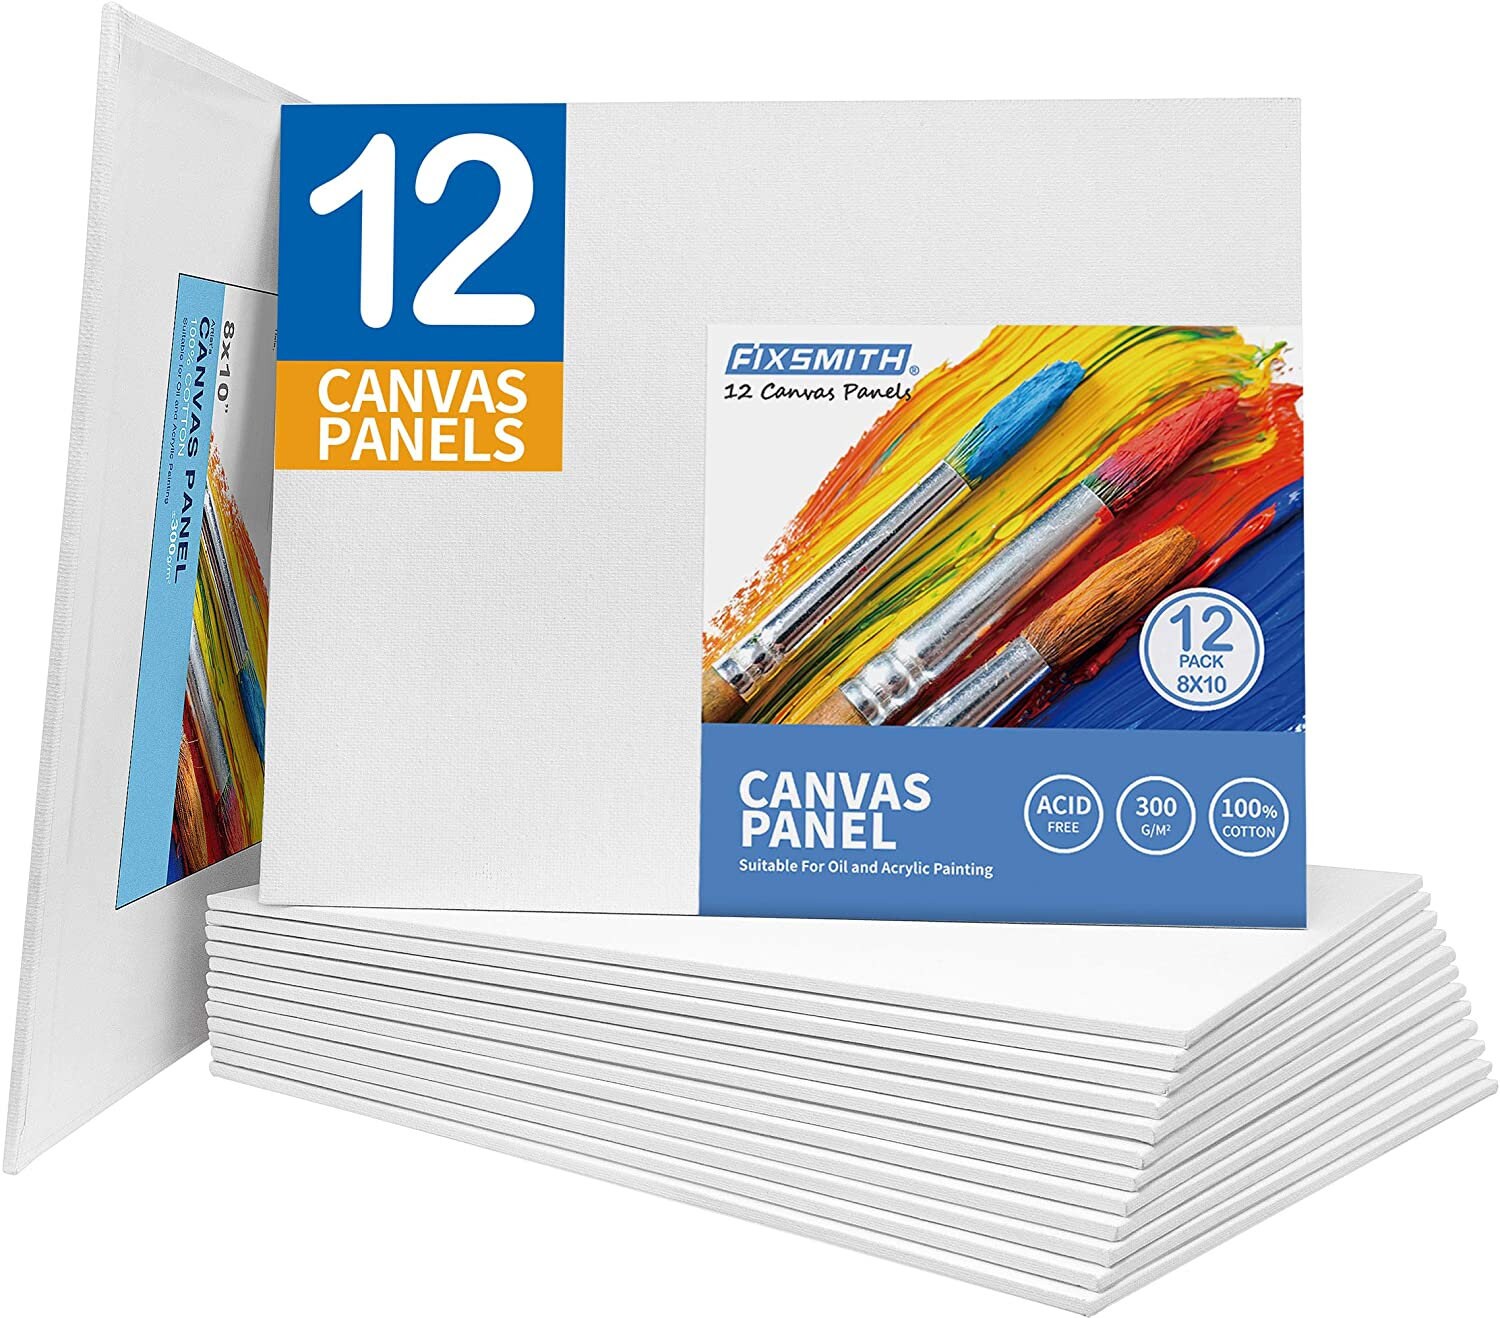 Buy FIXSMITH Painting Canvas Panels Canvas Board Super Value 12 Pack,100%  Cotton, Primed Canvas Panel, Acid Free, Artist Canvas Boards Online in  India 